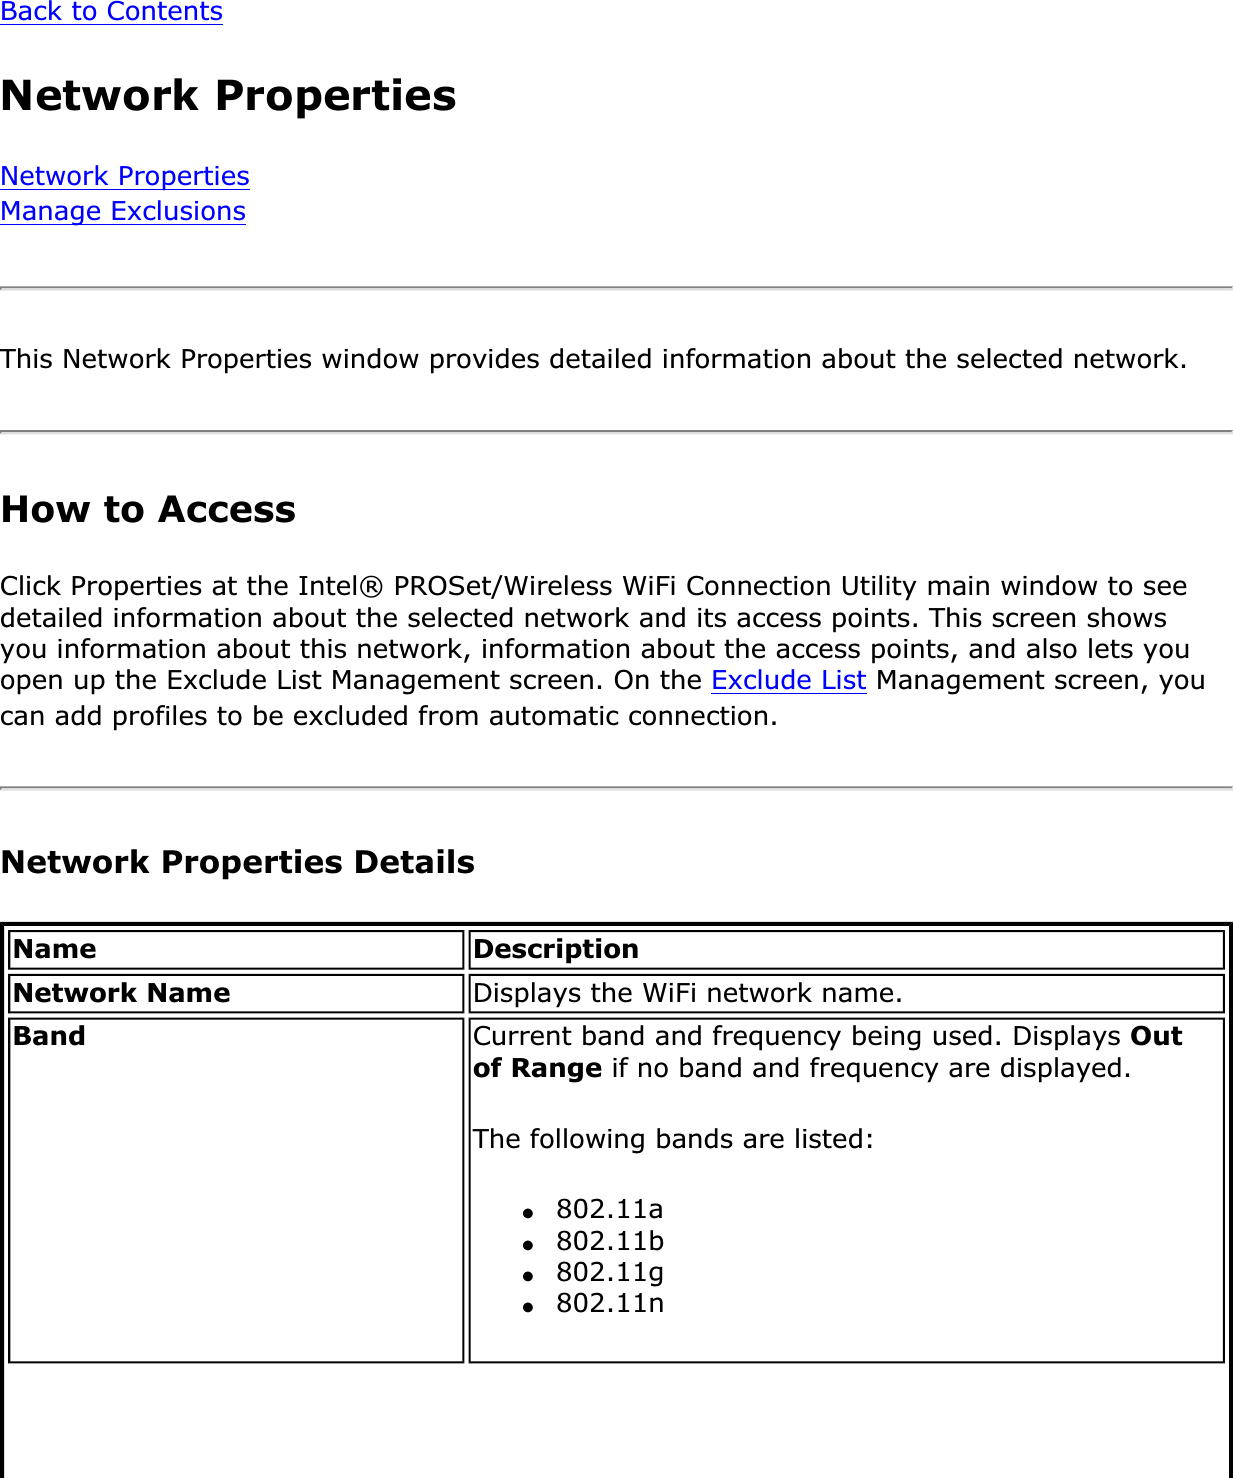 Back to ContentsNetwork PropertiesNetwork PropertiesManage ExclusionsThis Network Properties window provides detailed information about the selected network. How to Access Click Properties at the Intel® PROSet/Wireless WiFi Connection Utility main window to see detailed information about the selected network and its access points. This screen shows you information about this network, information about the access points, and also lets you open up the Exclude List Management screen. On the Exclude List Management screen, you can add profiles to be excluded from automatic connection.Network Properties Details Name DescriptionNetwork Name Displays the WiFi network name.Band Current band and frequency being used. Displays Outof Range if no band and frequency are displayed.The following bands are listed:●802.11a●802.11b●802.11g●802.11n